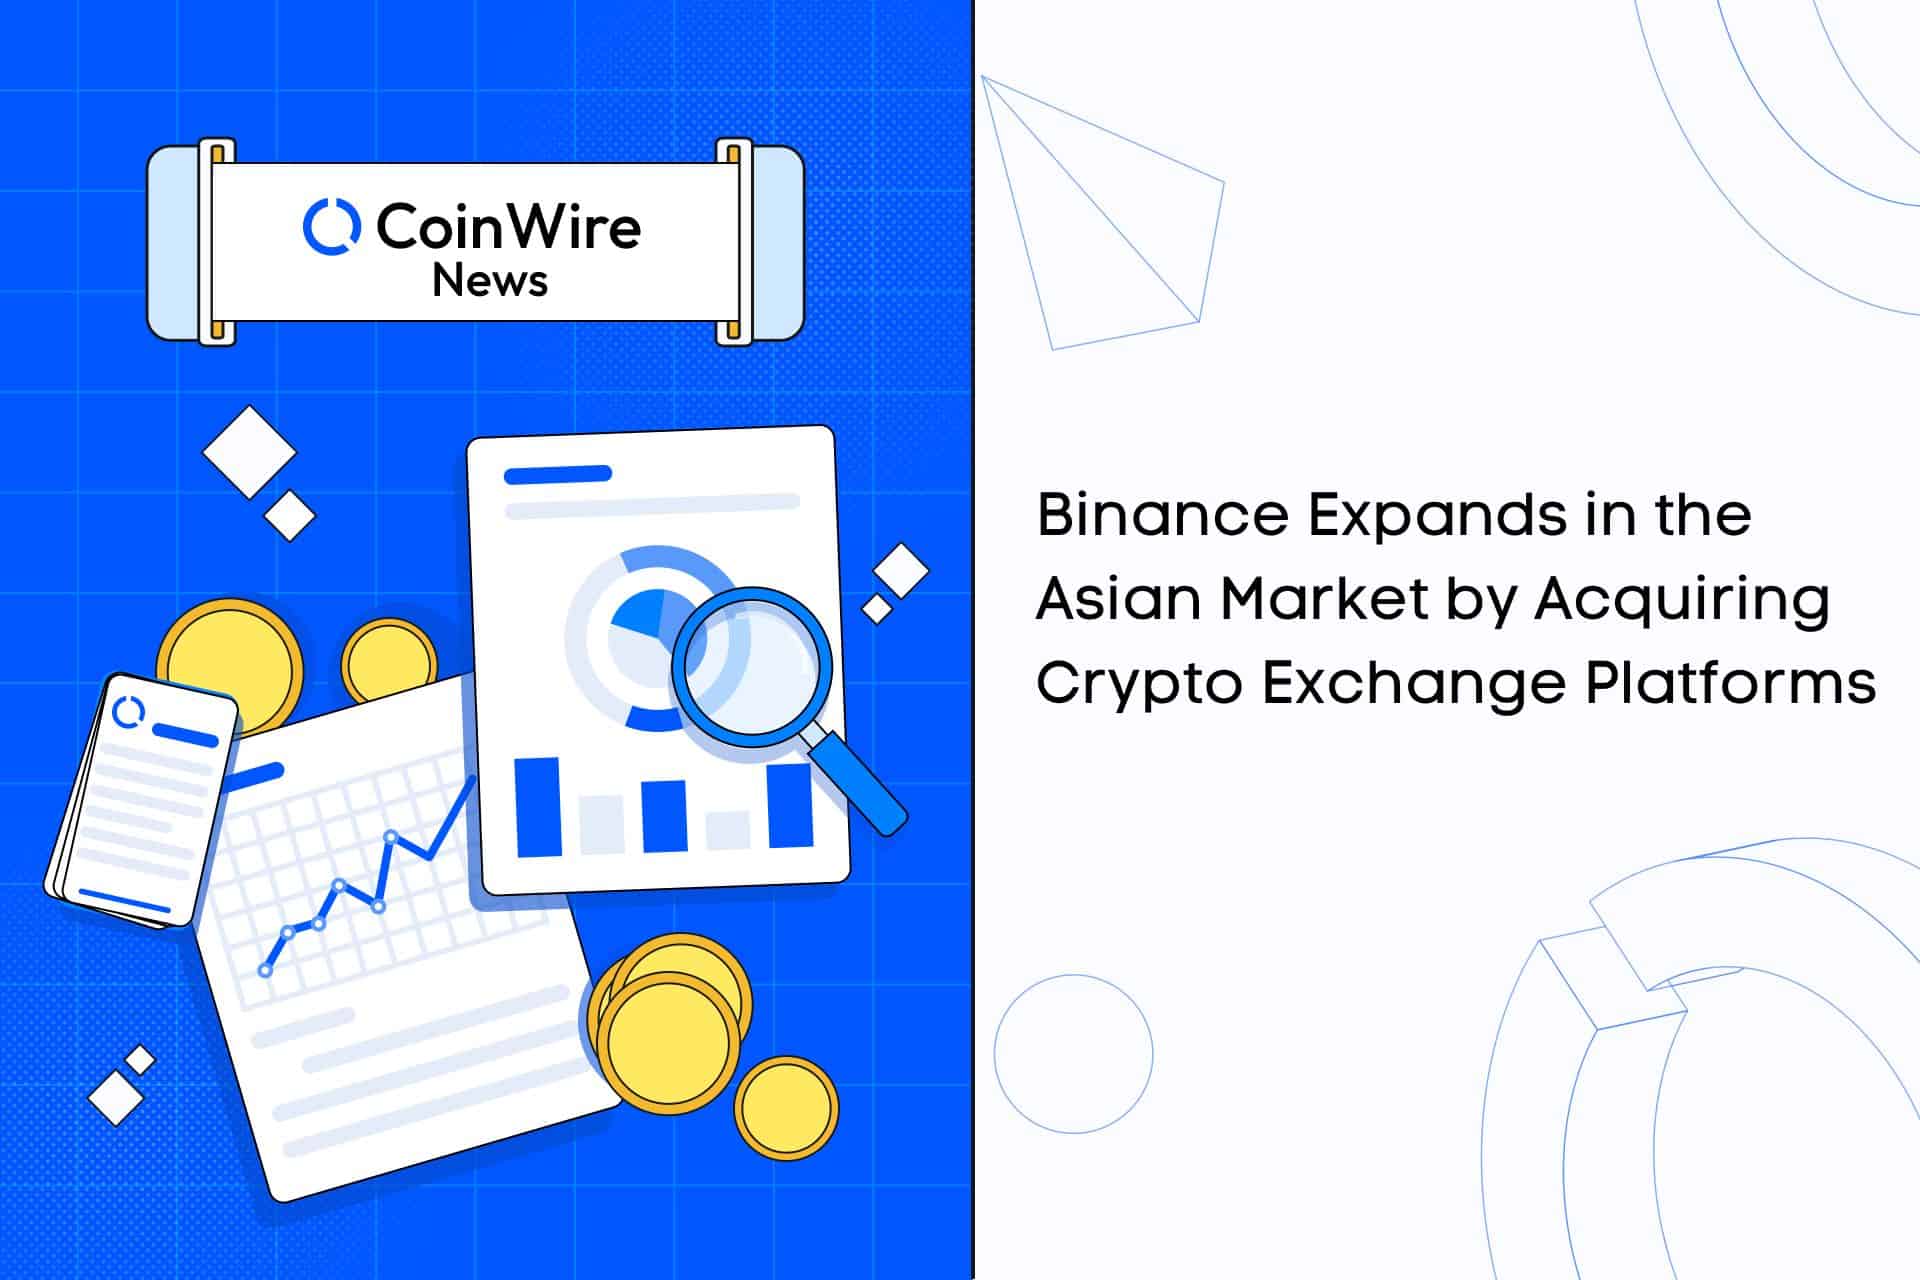 Binance Expands In The Asian Market By Acquiring Crypto Exchange Platforms